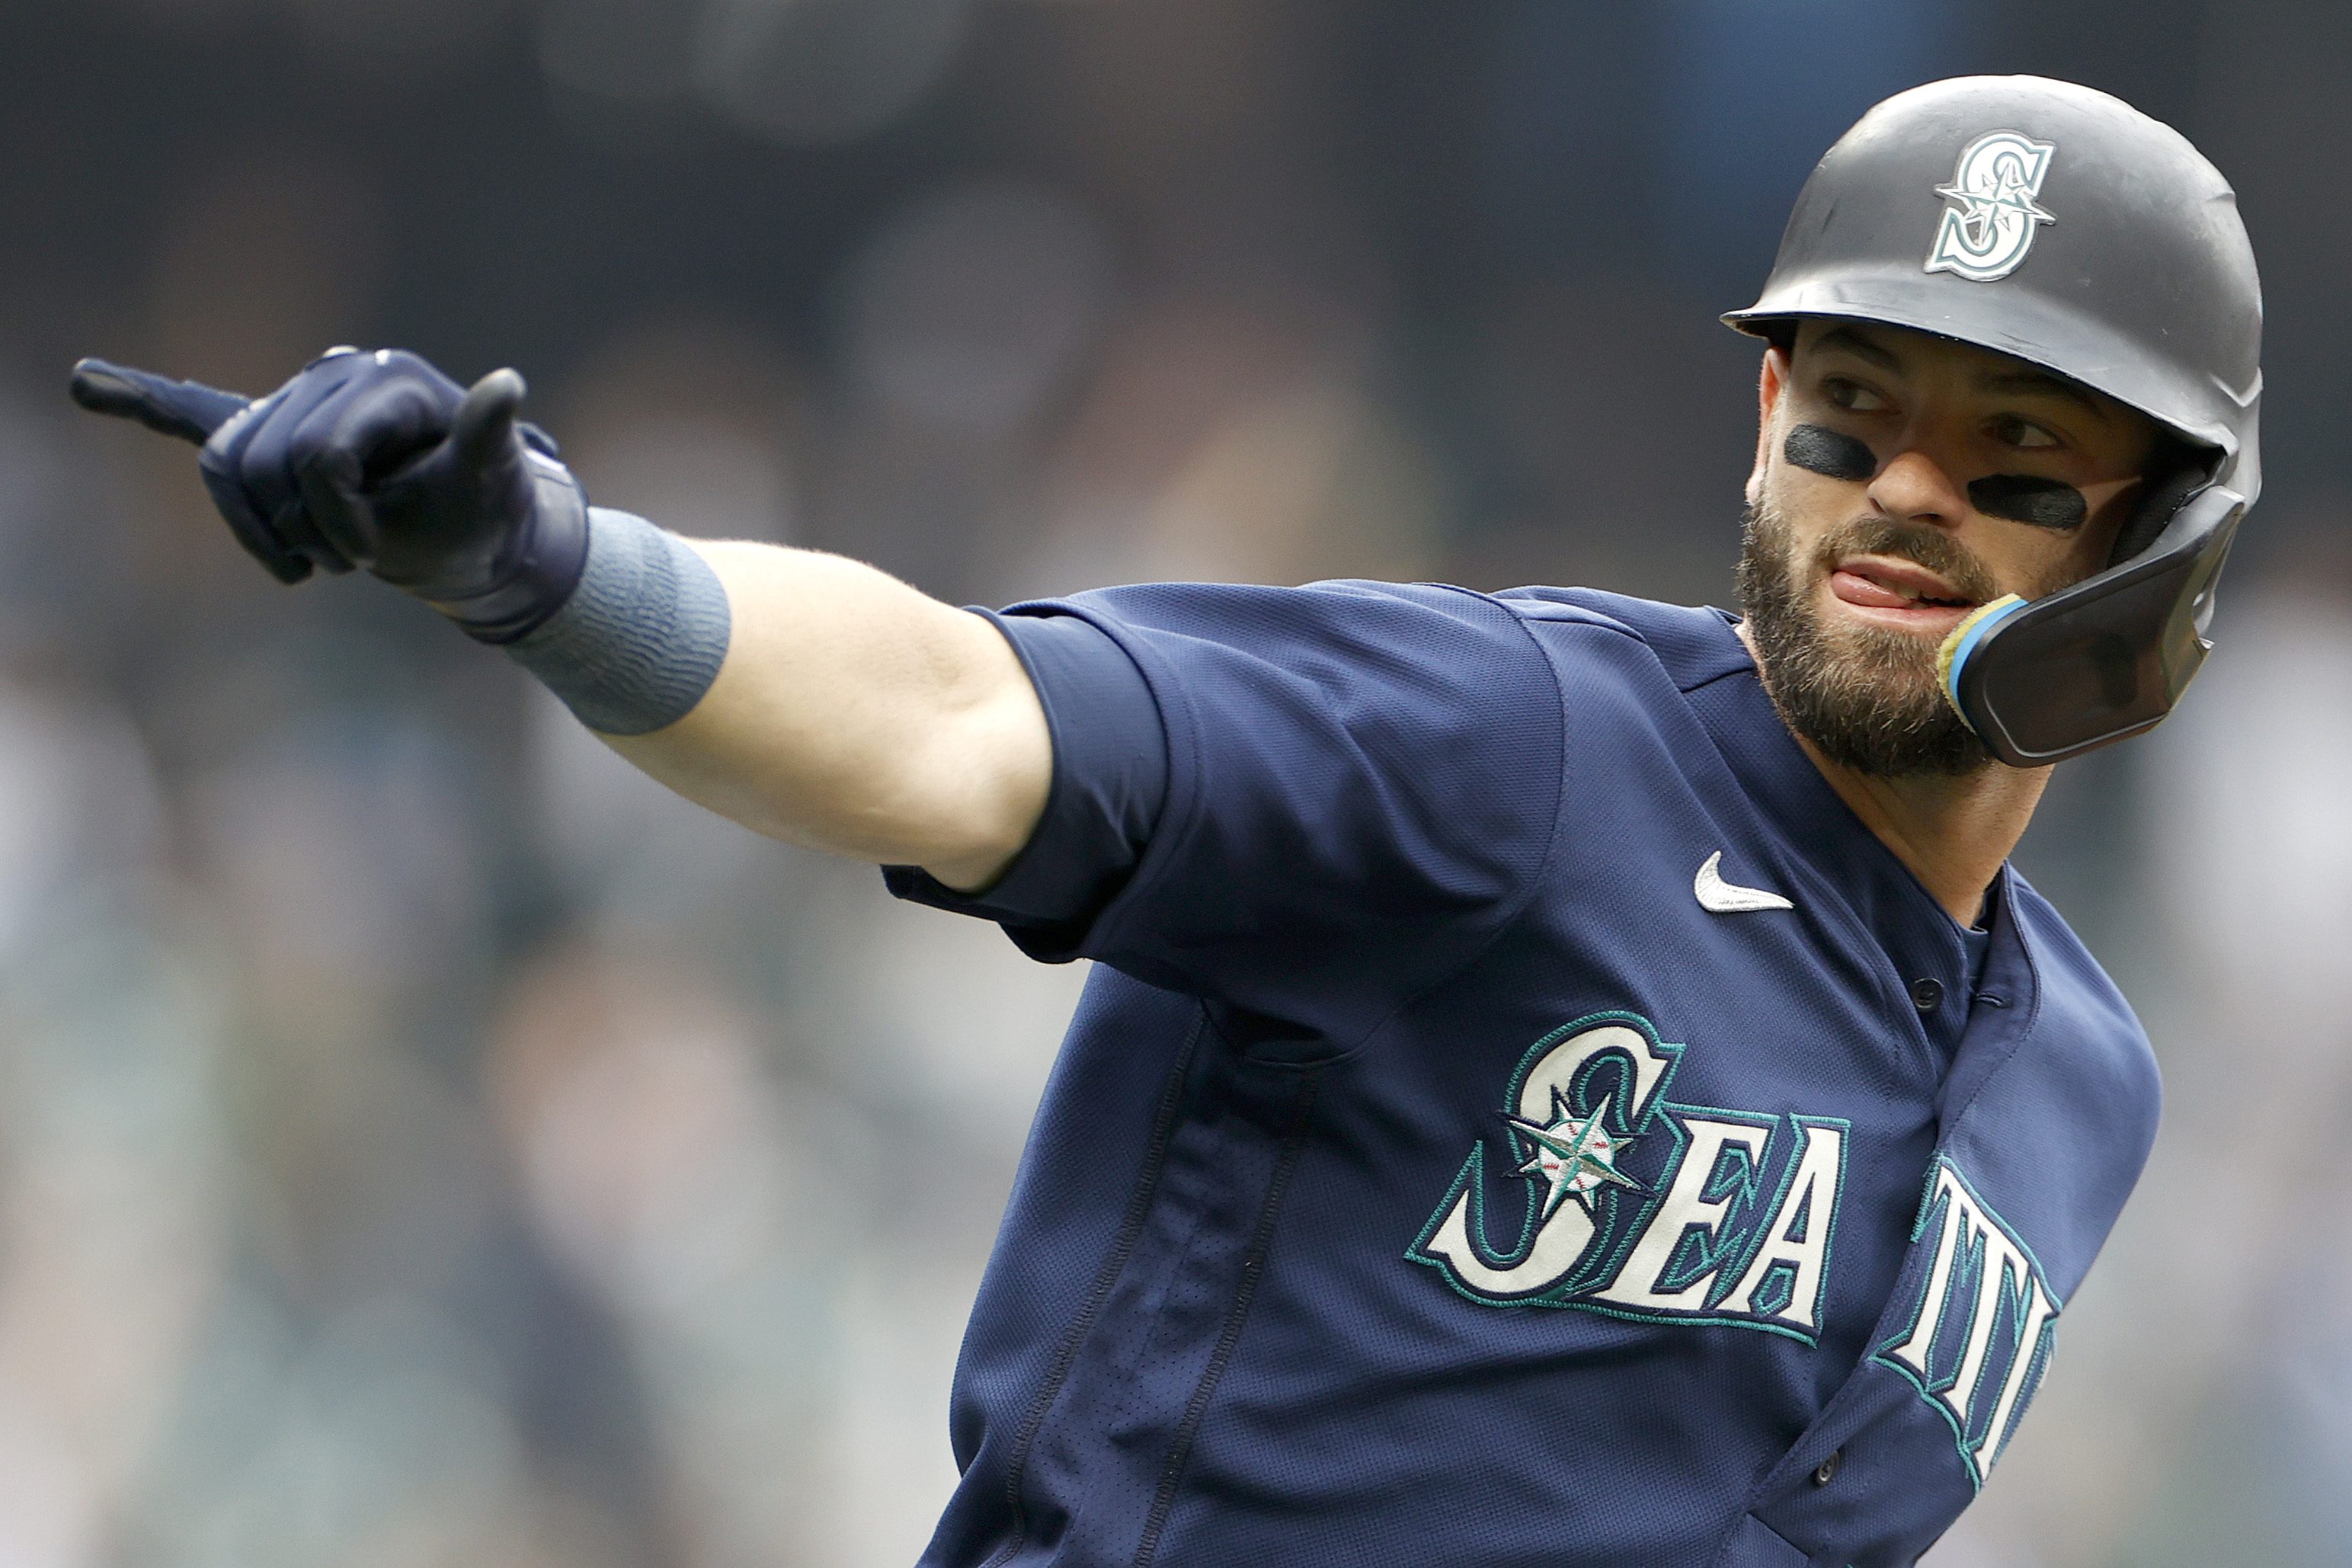 Mitch Haniger #17 of the Seattle Mariners celebrates his home run against the Detroit Tigers during the first inning at T-Mobile Park on October 05, 2022 in Seattle, Washington.